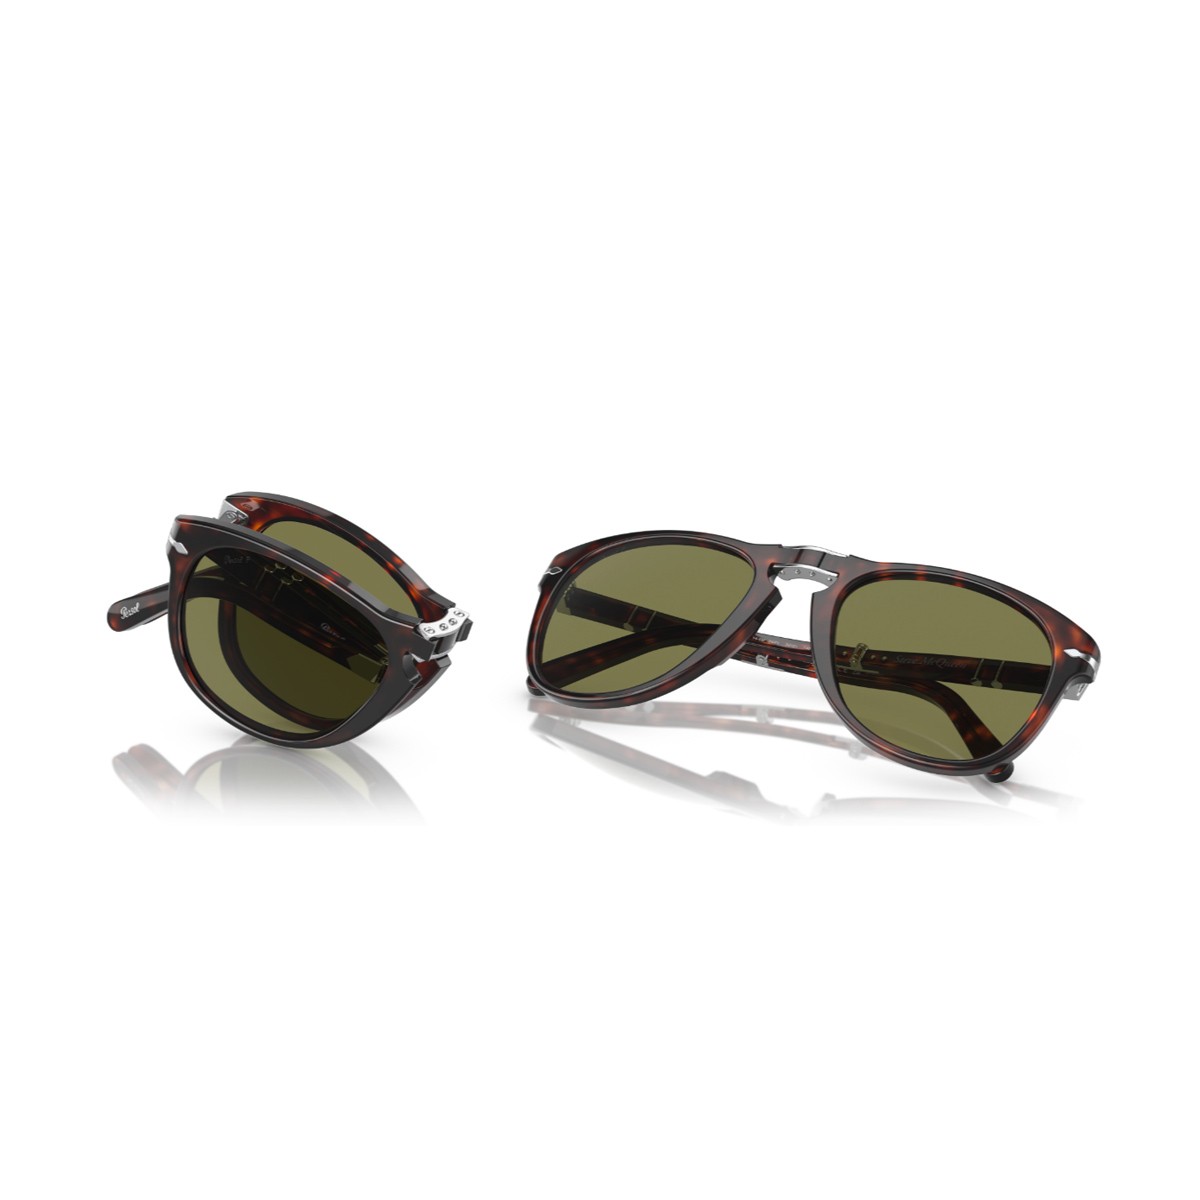 Persol® Men's Sunglasses - Classic Style and Quality | Persol USA